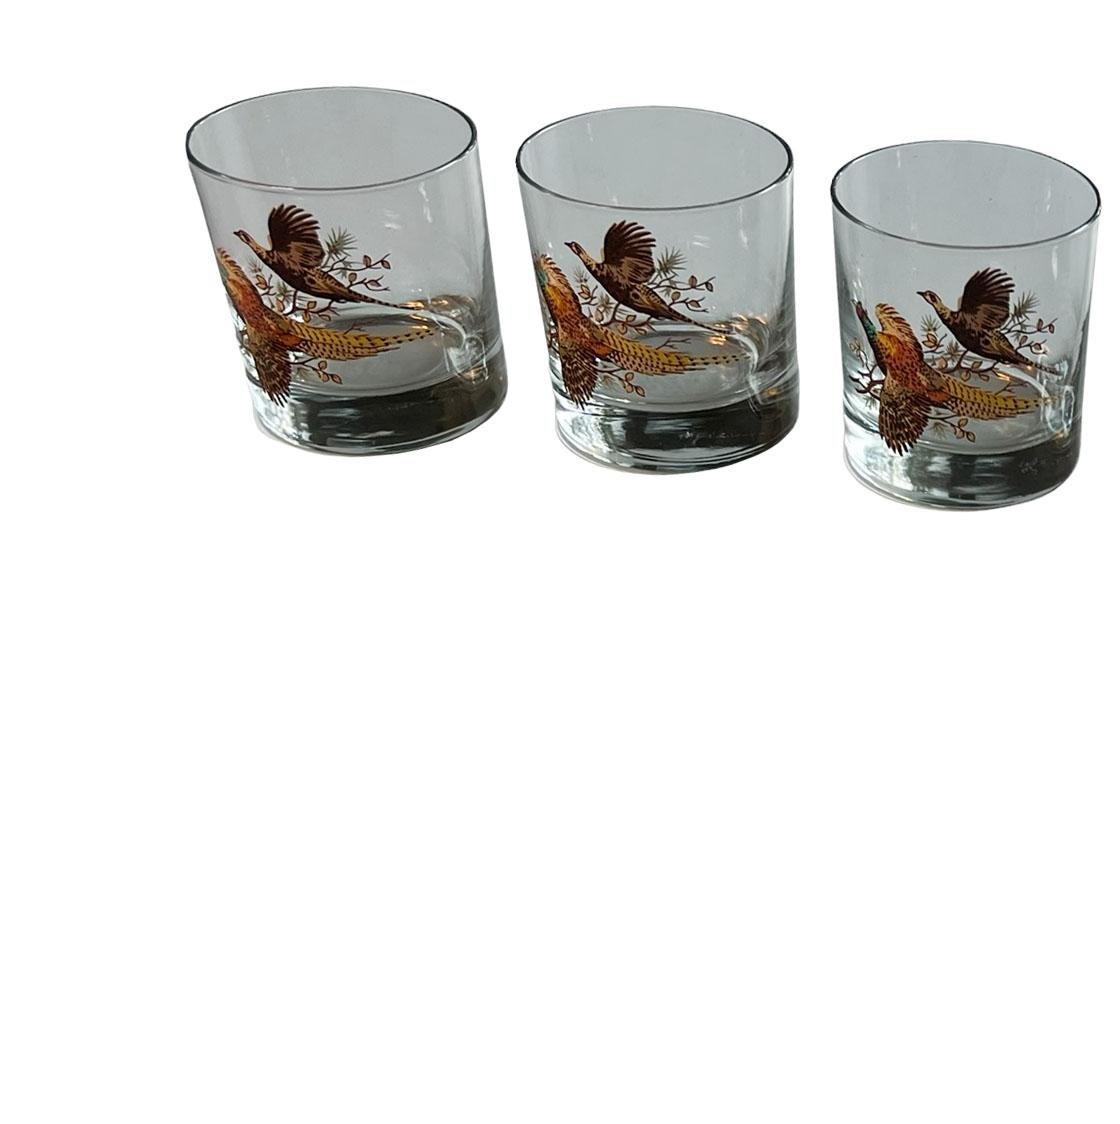 Mid-20th Century Vintage On The Rocks Lowball Glasses With Pheasants 